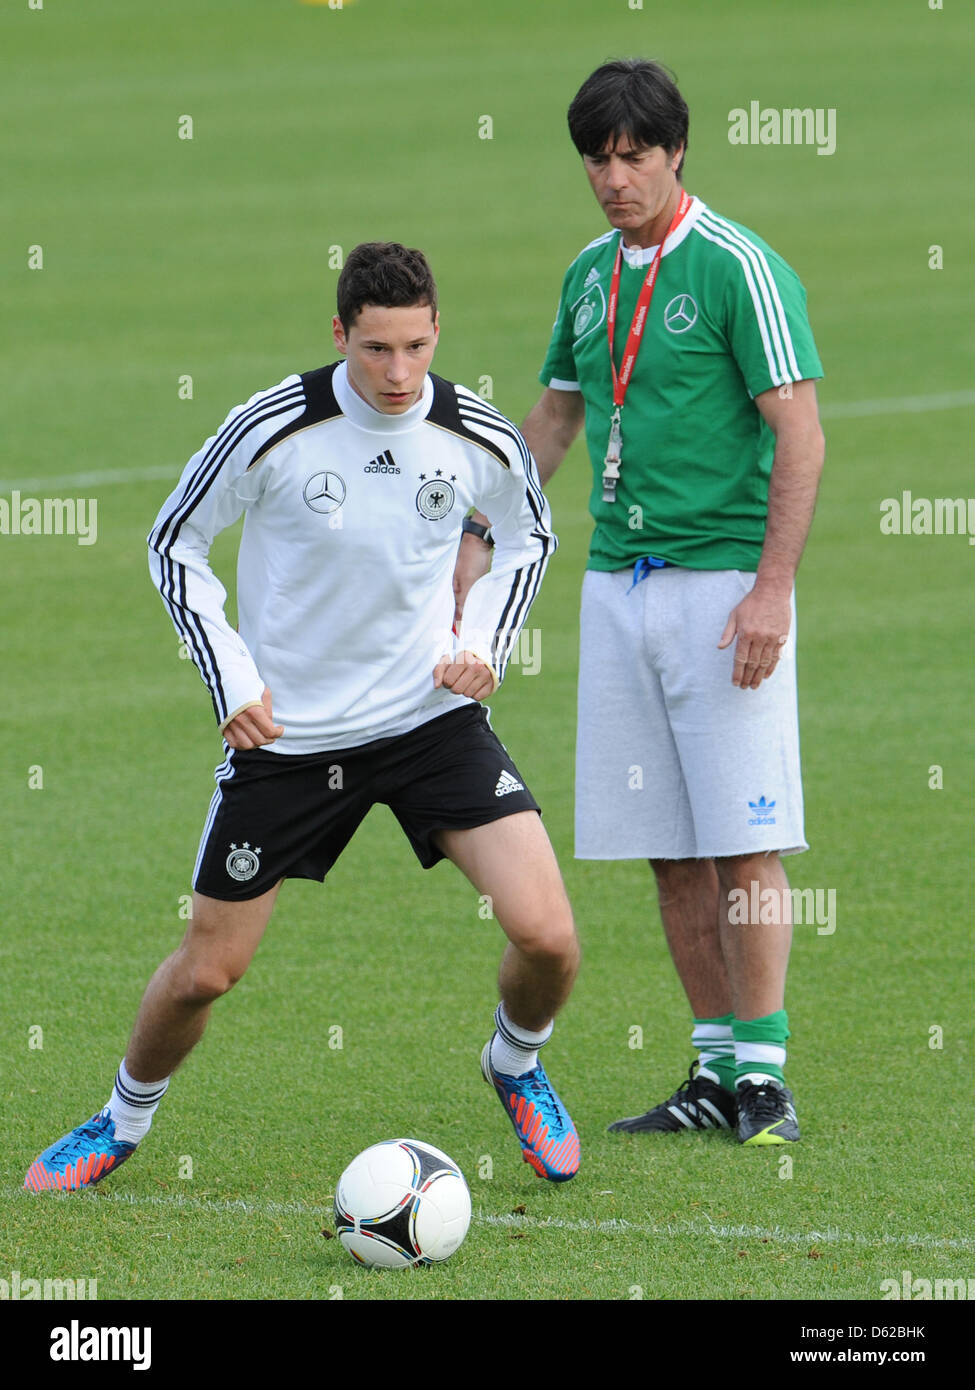 Germany's Julian Draxler (L) practices under the eyes of head coach Joachim Loew on a pitch near Callian, France, 18 May 2012. The German national team is preparing for the Euro 2012 in southern France until 20 May. Photo: ANDREAS GEBERT Stock Photo